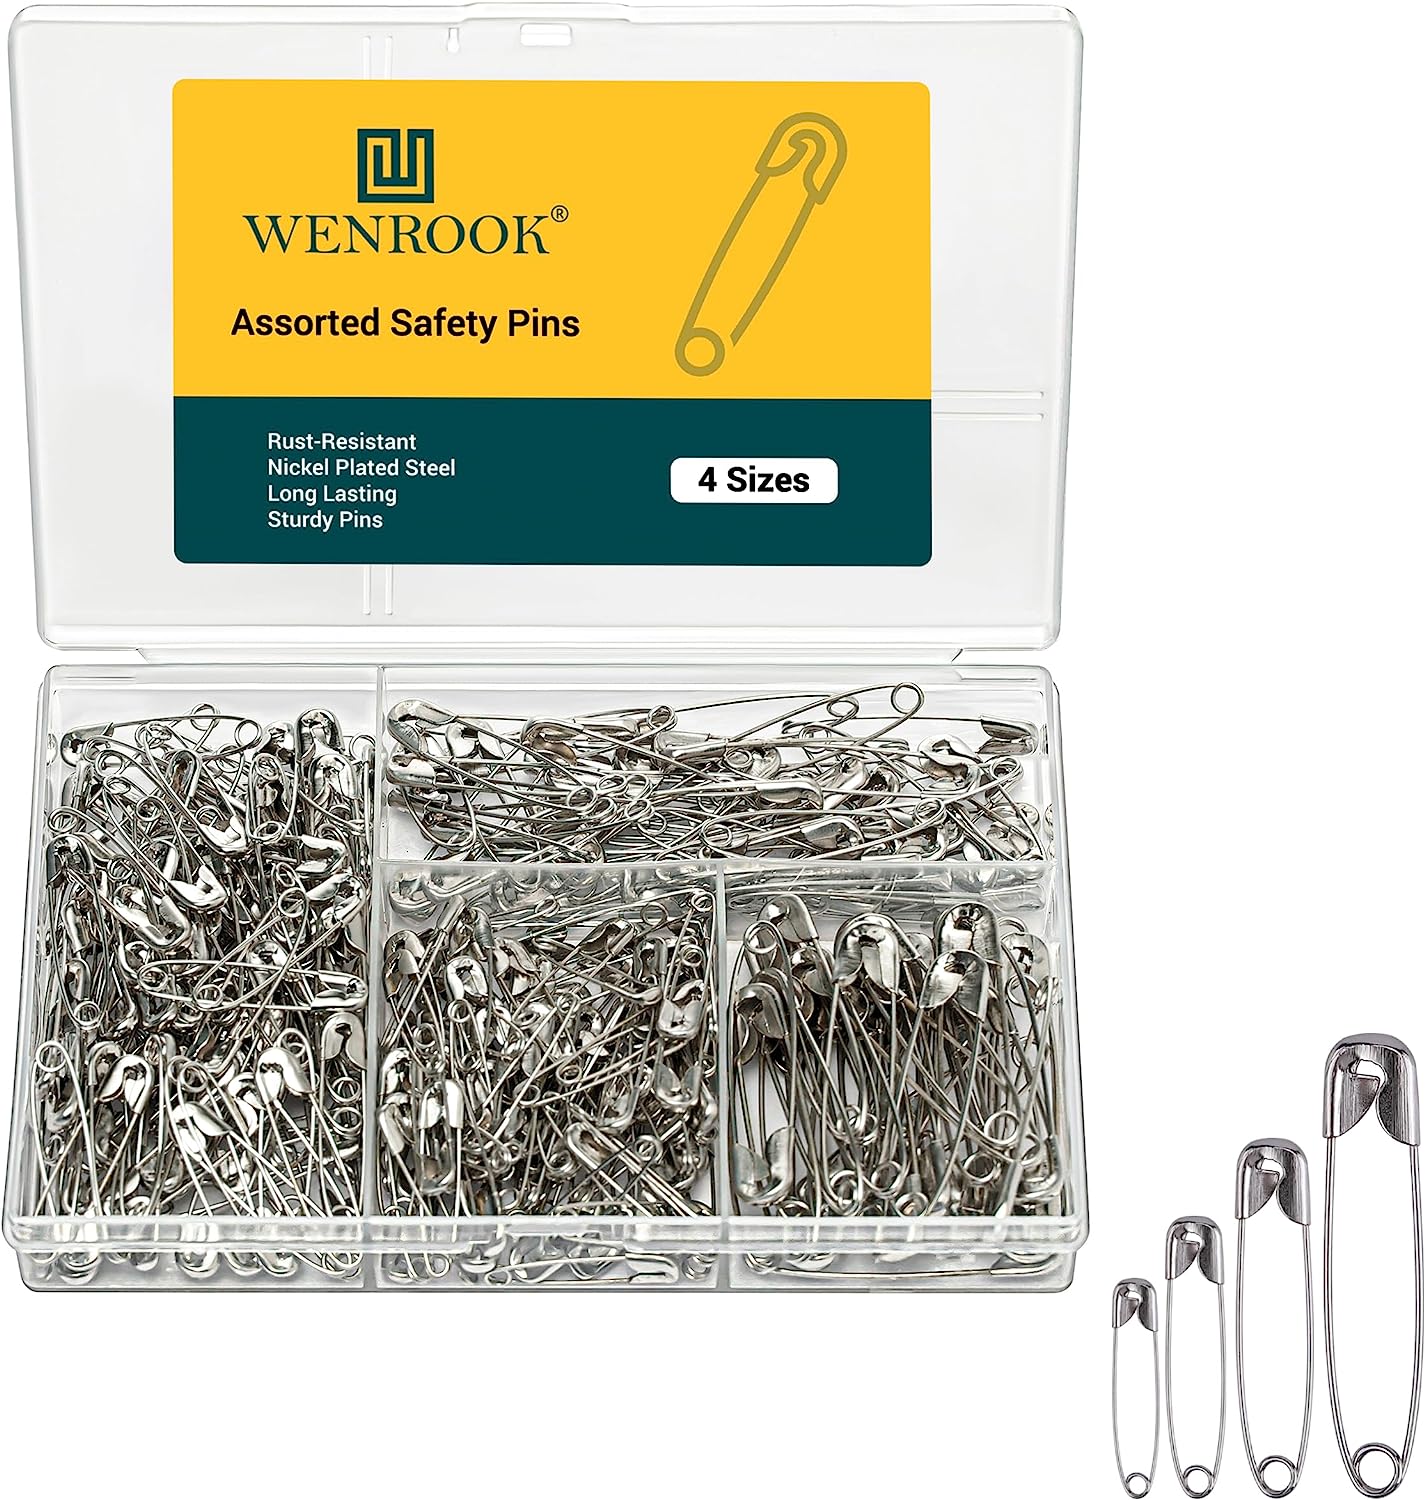 Wenrook Safety Pins Assorted 4 Different Sizes - 300 [...]